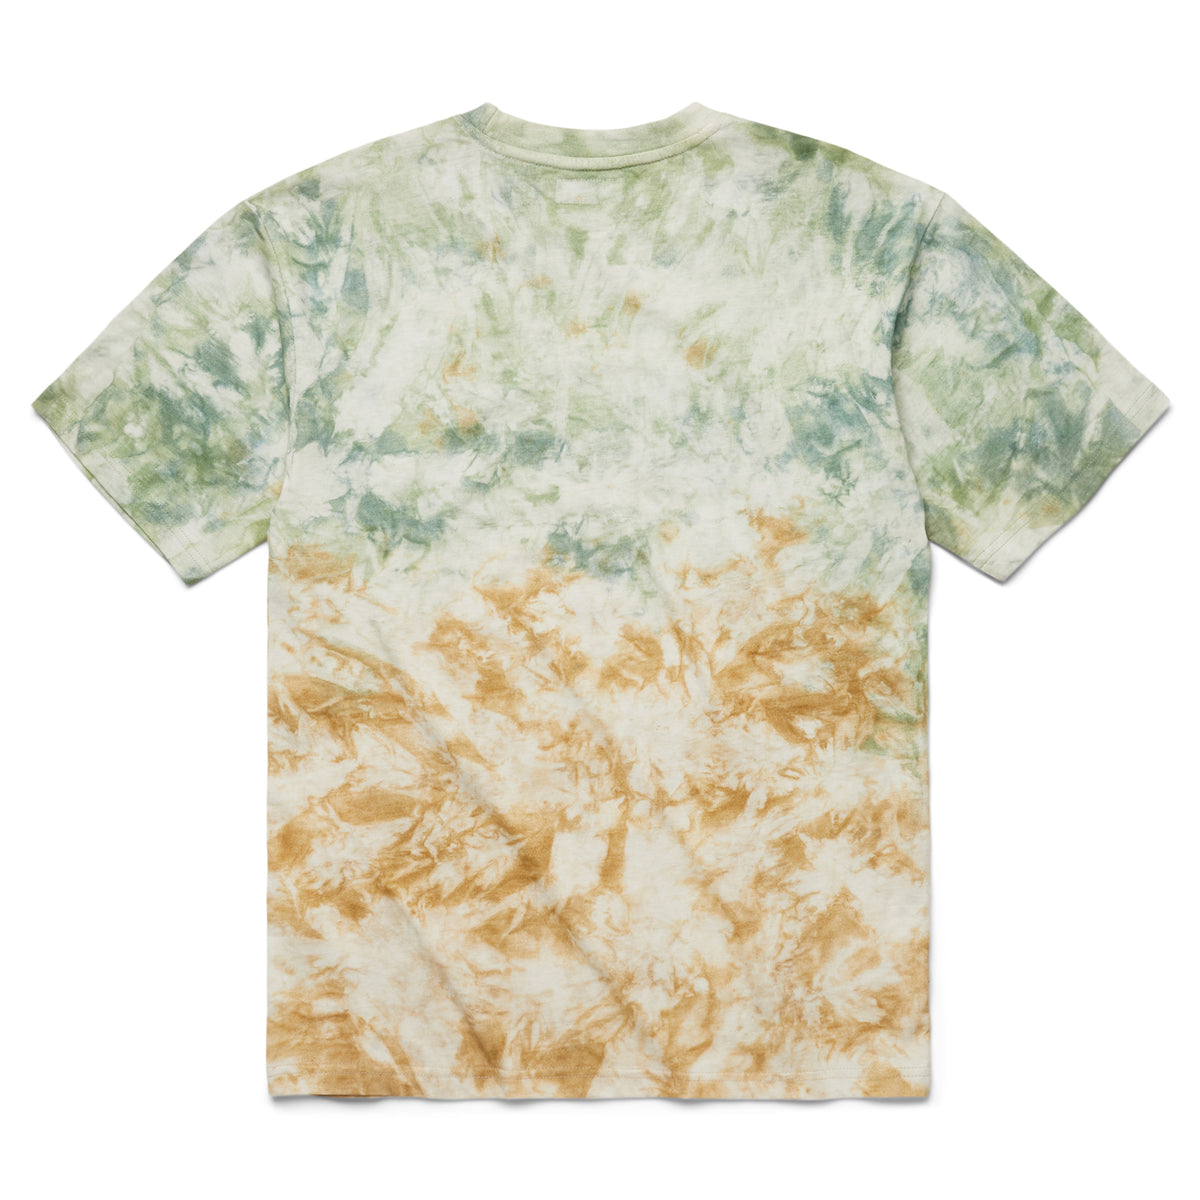 MARKET PARADISE AT SKELLY TIE DYE T-SHIRT